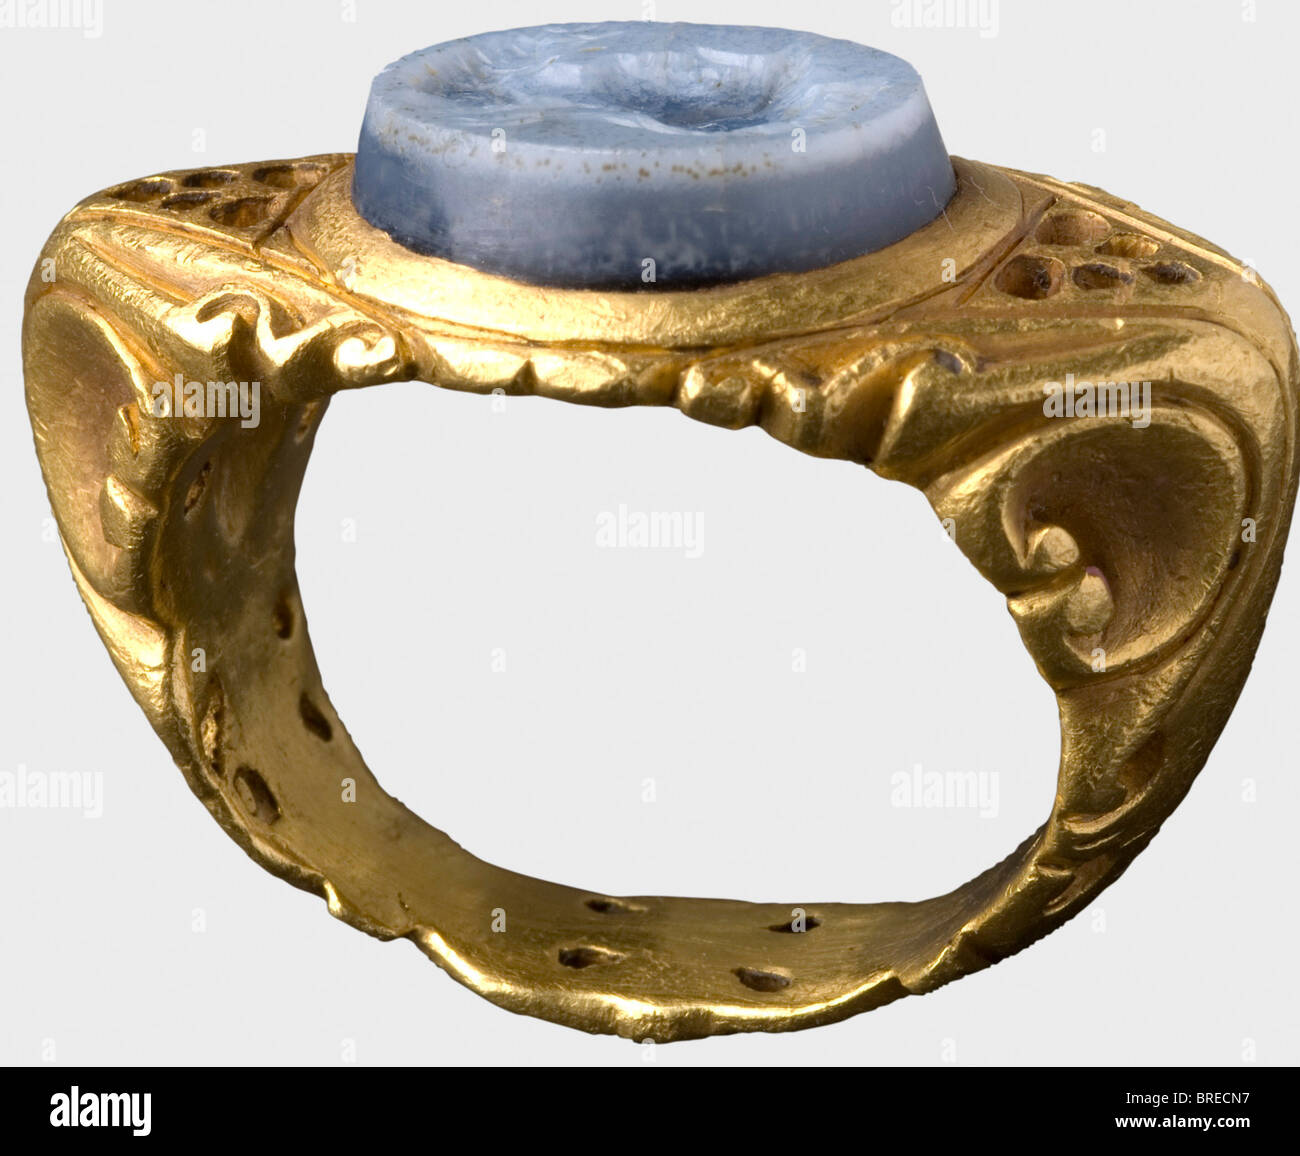 A Roman gold ring with an agate gem, 3rd/4th century A.D. Heavy band with richly engraved openwork decoration. A blue, layered agate set in the top, carved with the head of Minerva. Cleaned excavation discovery. Weight 34 g. historic, historical, ancient world, ancient world, ancient times, object, objects, stills, clipping, cut out, cut-out, cut-outs, jewellery, jewelry, noble, precious, Stock Photo